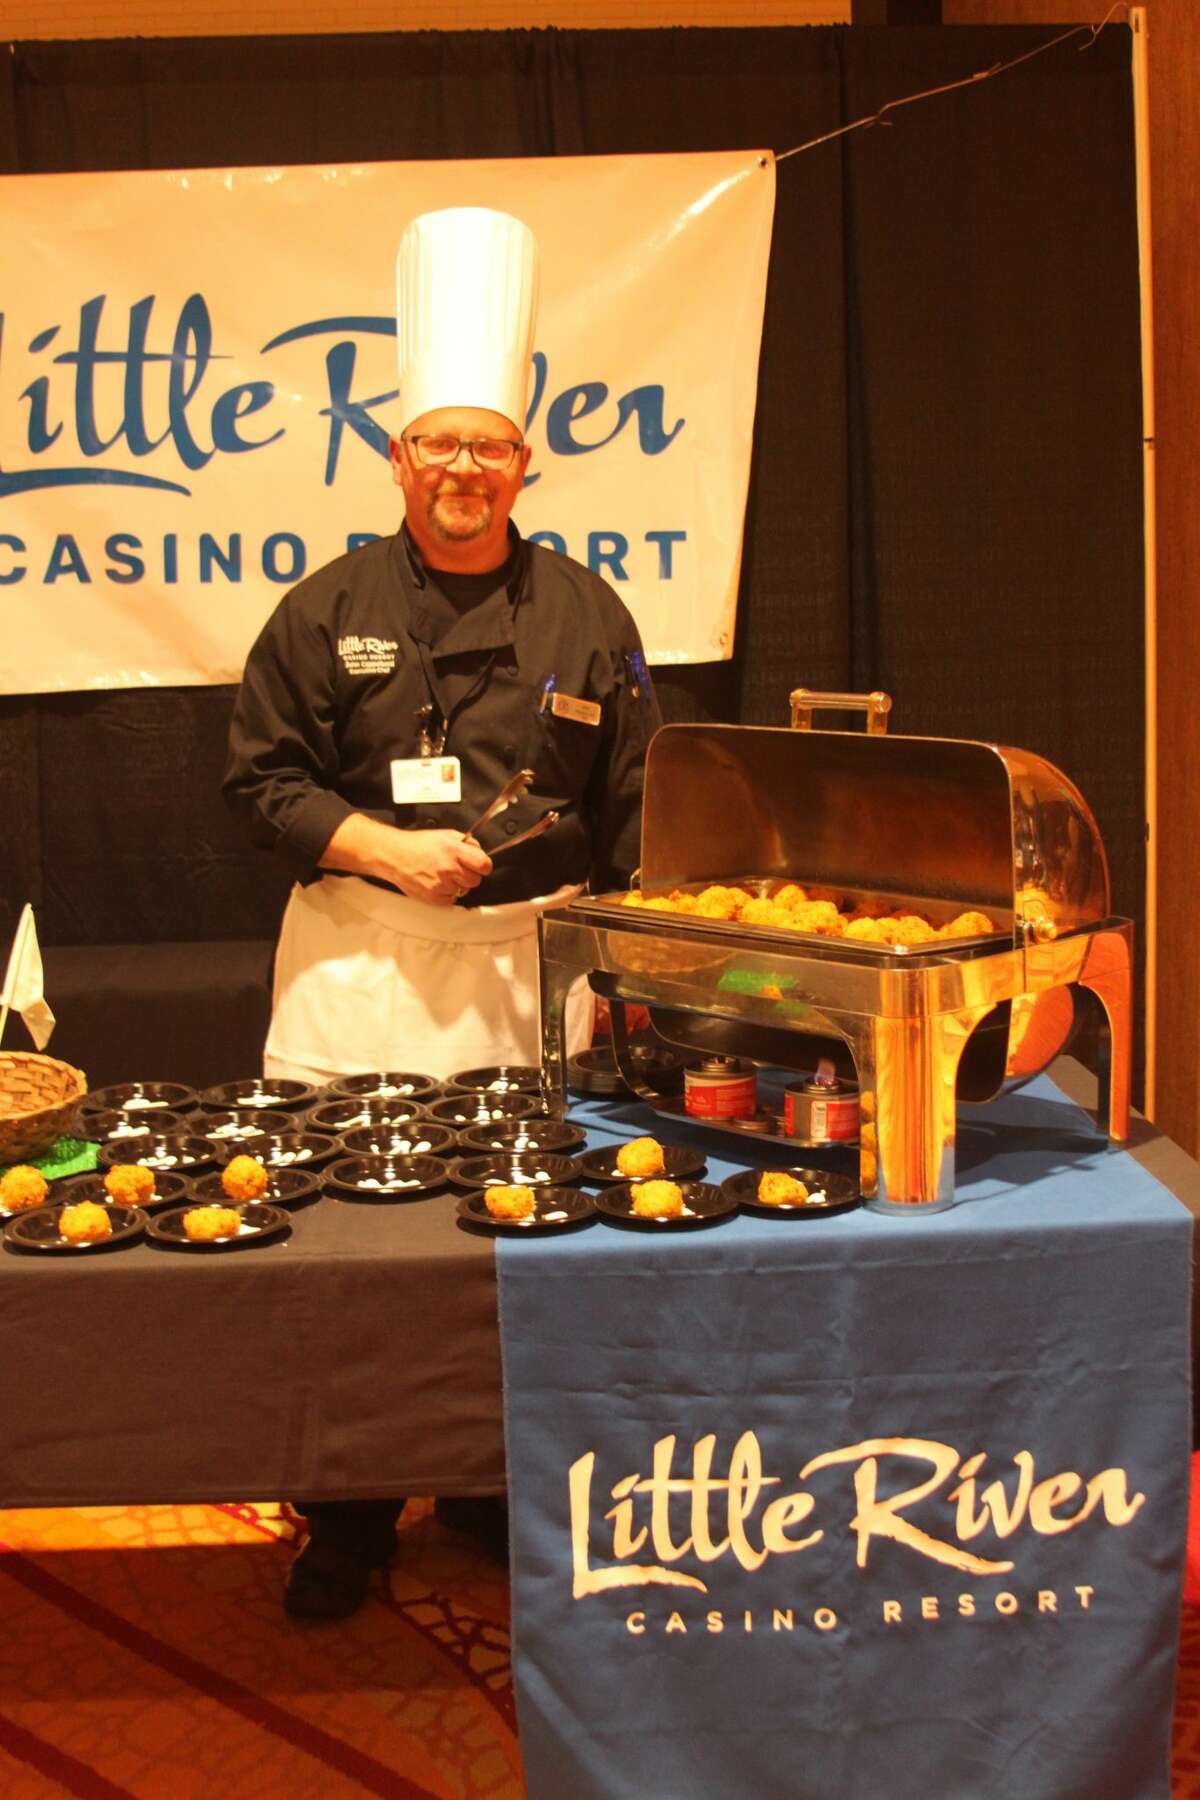 These are scenes from Wednesday night's Taste of Manistee event held at the Little River Casino Resort, hosted by the Manistee News Advocate.